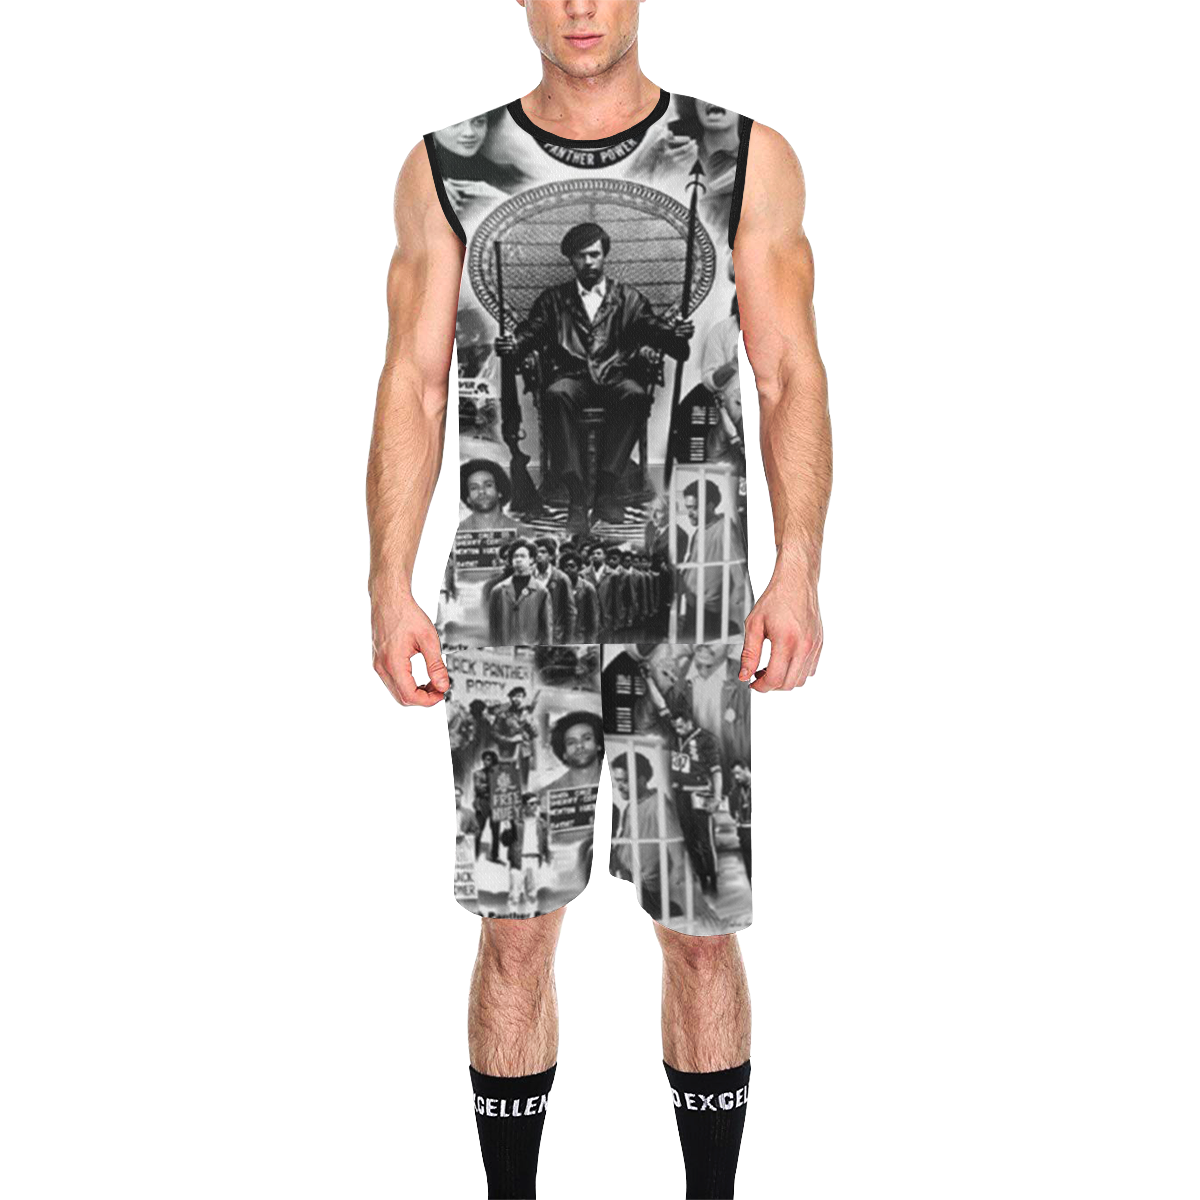 BLACK PANTHER PARTY All Over Print Basketball Uniform